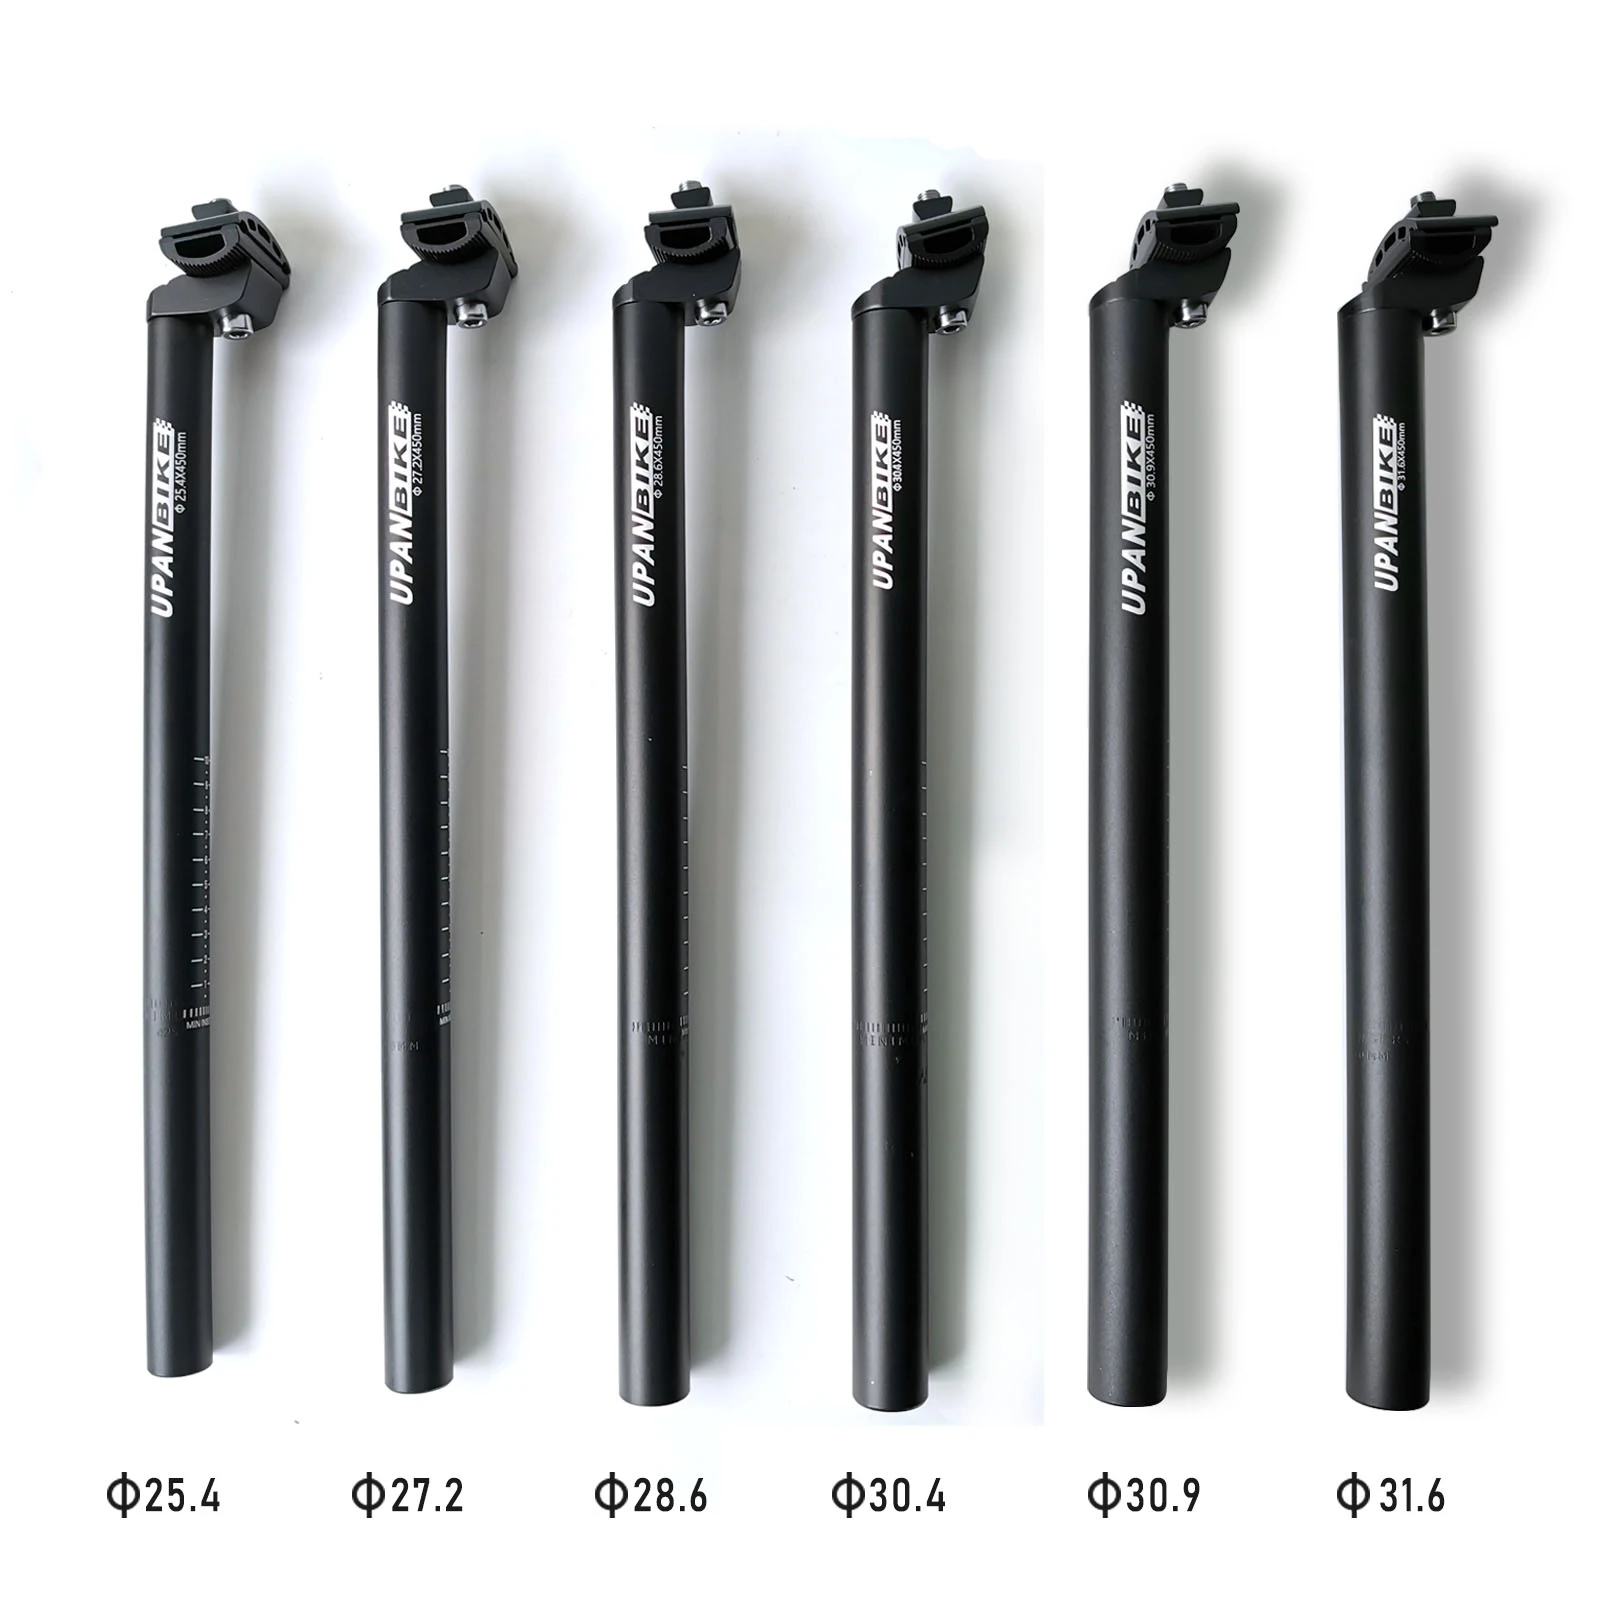 UPANBIKE Bike Seatpost 350mm/450mm 25.4mm-31.6mm Mountain Bicycle Seat Post with Adjust Clamp